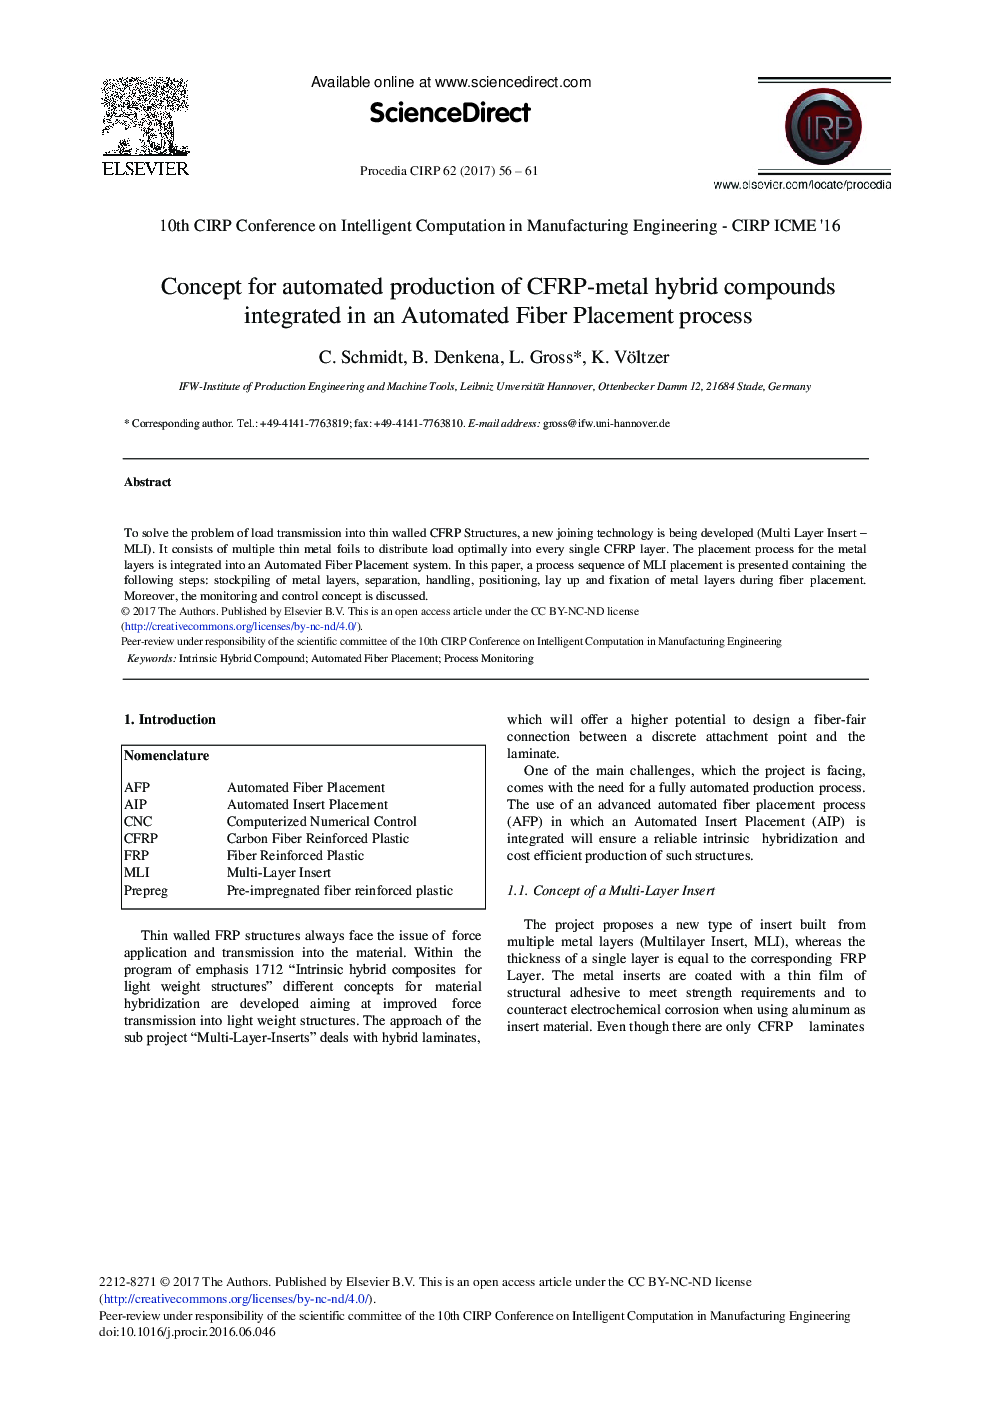 Concept for Automated Production of CFRP-metal Hybrid Compounds Integrated in an Automated Fiber Placement Process